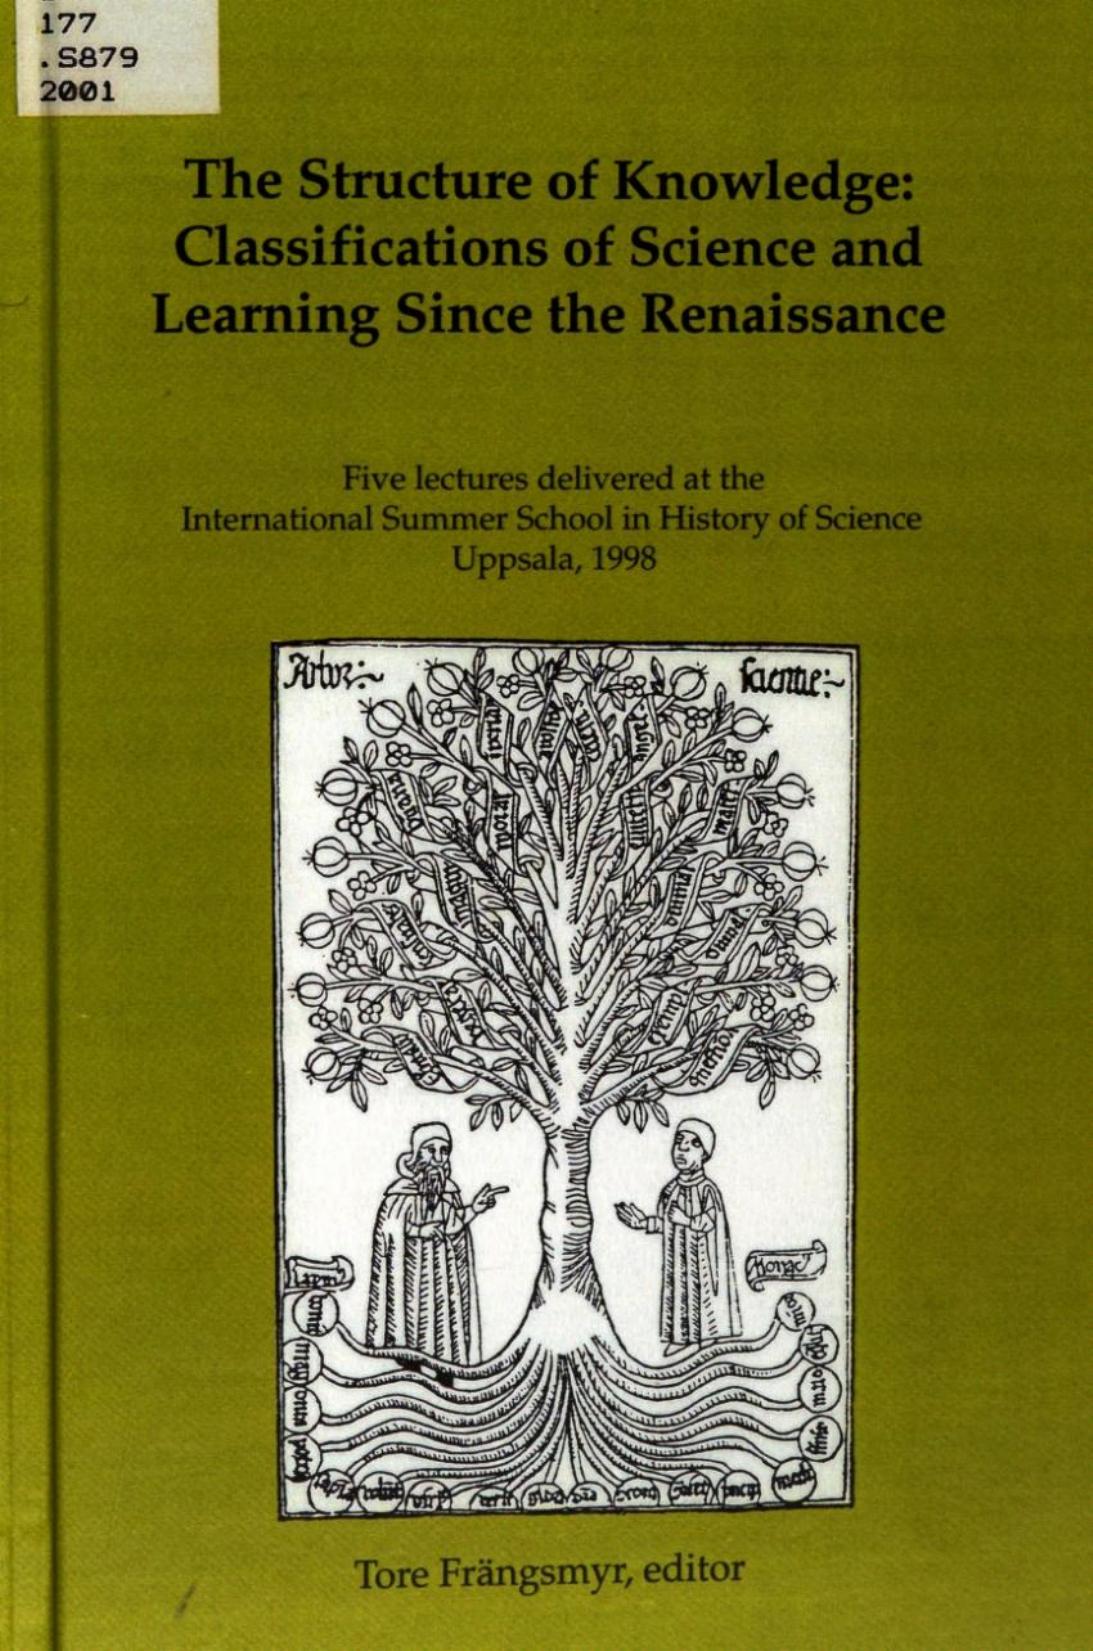 The Structure of Knowledge: Classifications of Science and Learning Since the Renaissance